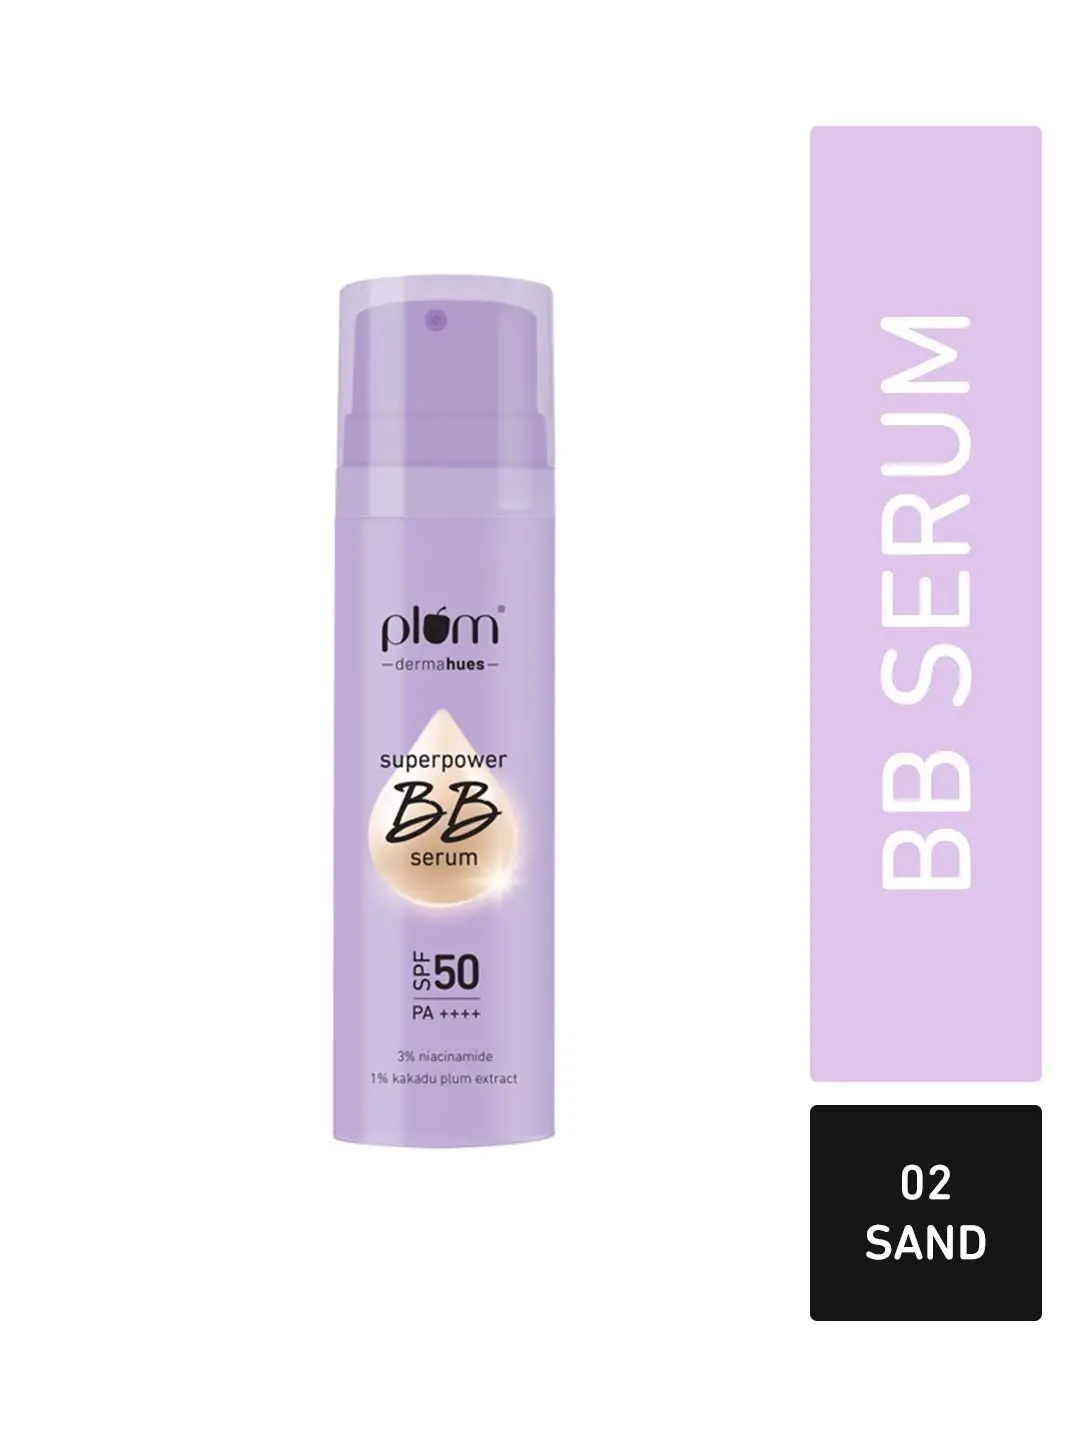 Plum Superpower BB Serum with SPF 50 PA ++++ | Natural Everyday Base | Evens Out Skin Tone | Buildable Coverage | With 3% Niacinamide | 100% Vegan & Cruelty Free | 30 ml - 02 Sand